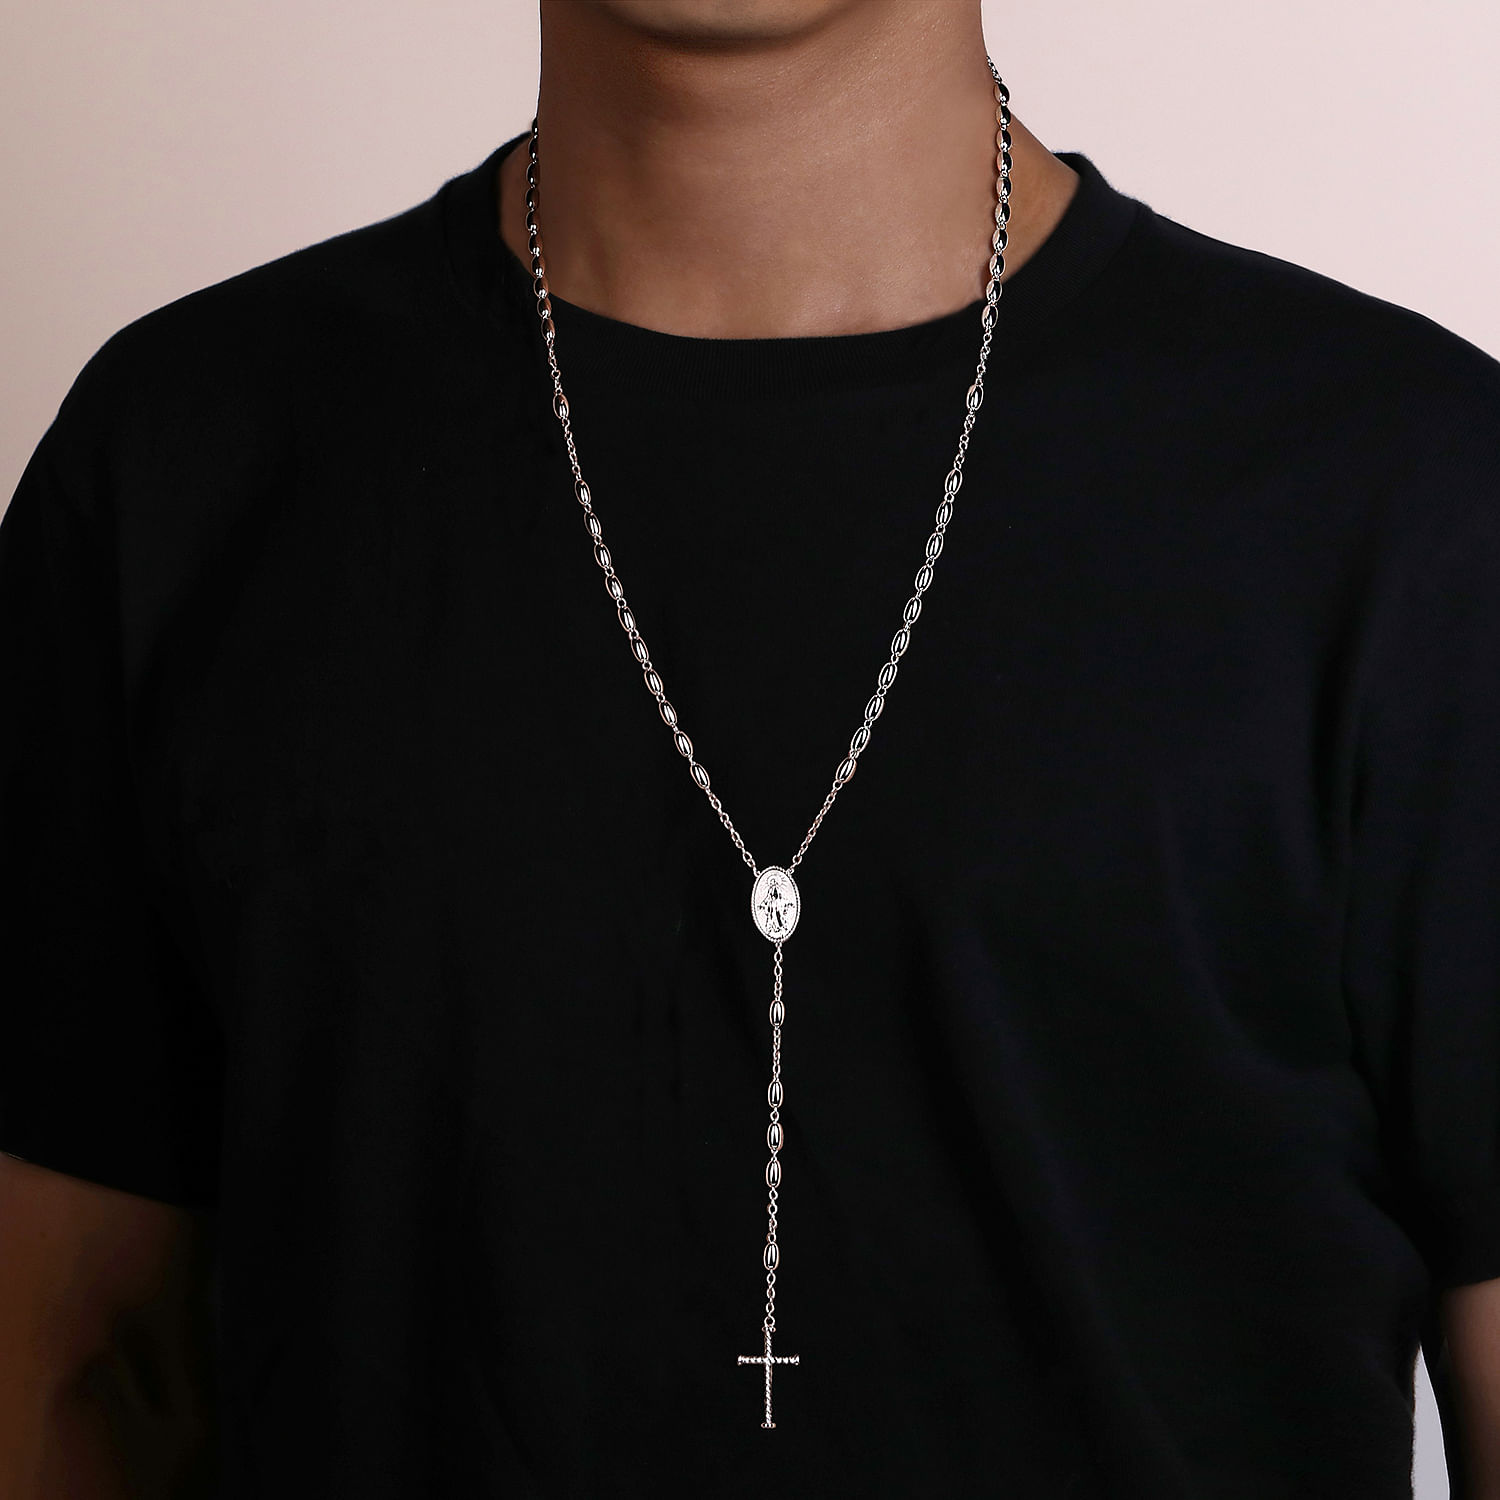 27 Inch 925 Sterling Silver Men's Cross Rosary Solid  Men's Chain Necklace